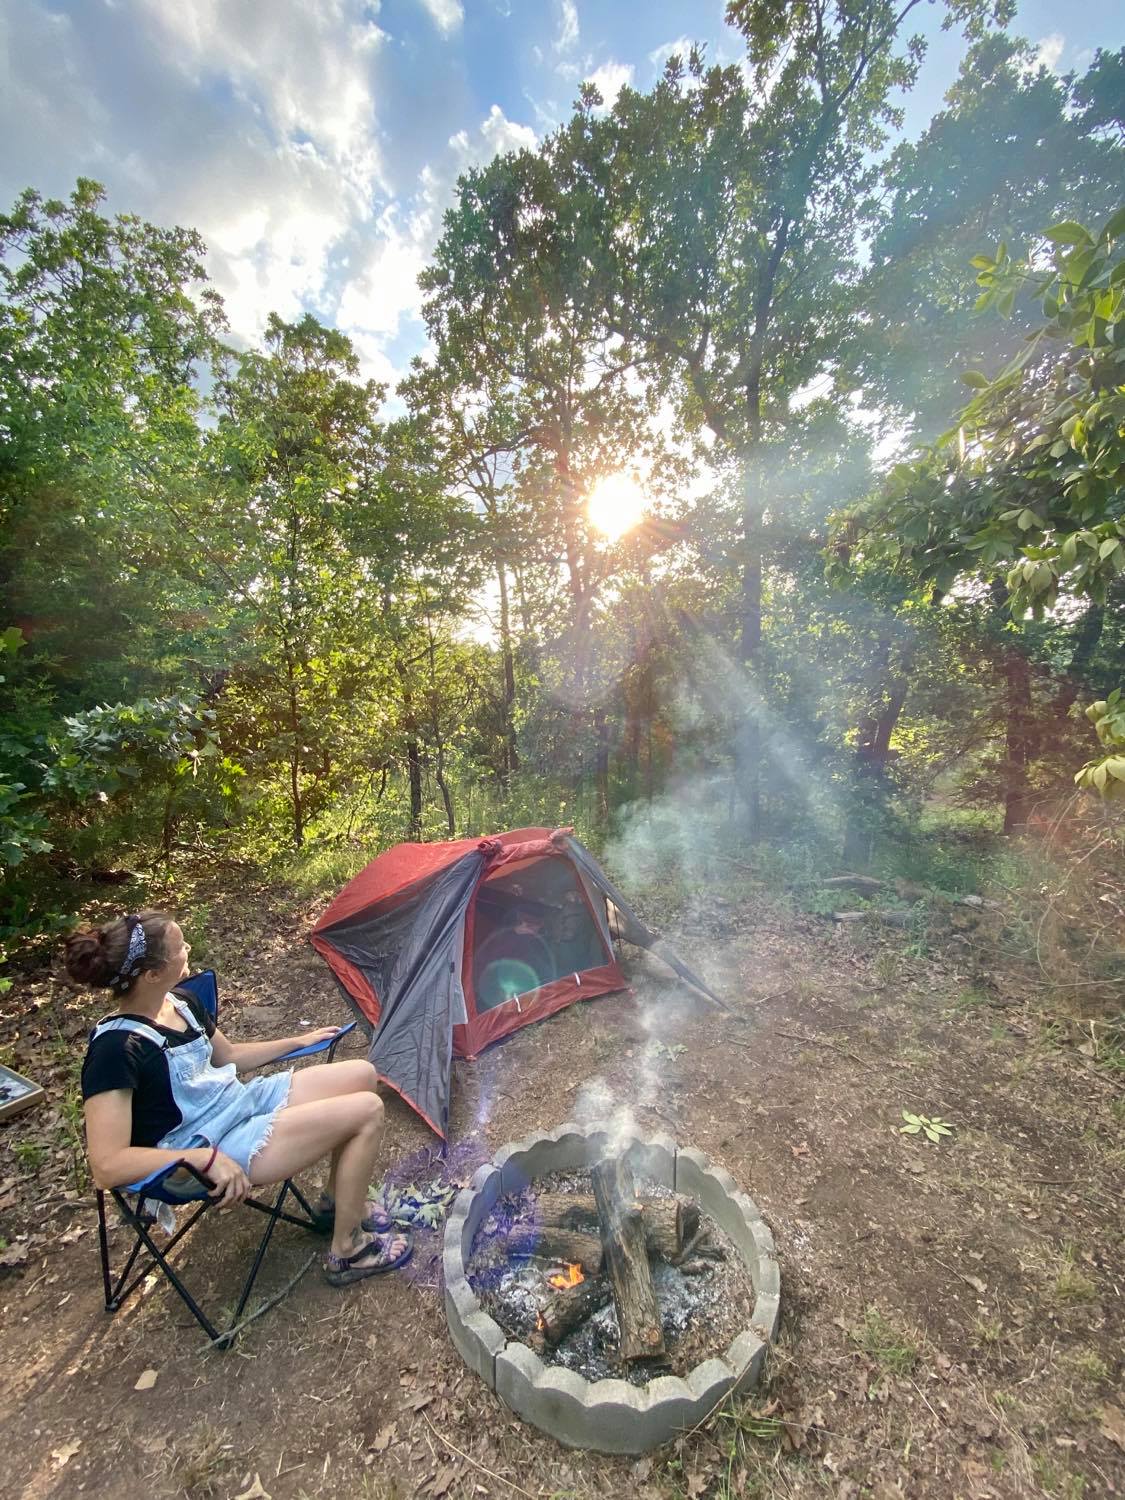 Honeysuckle is a small hidden campsite with it's own firepit, hammock, and bench.